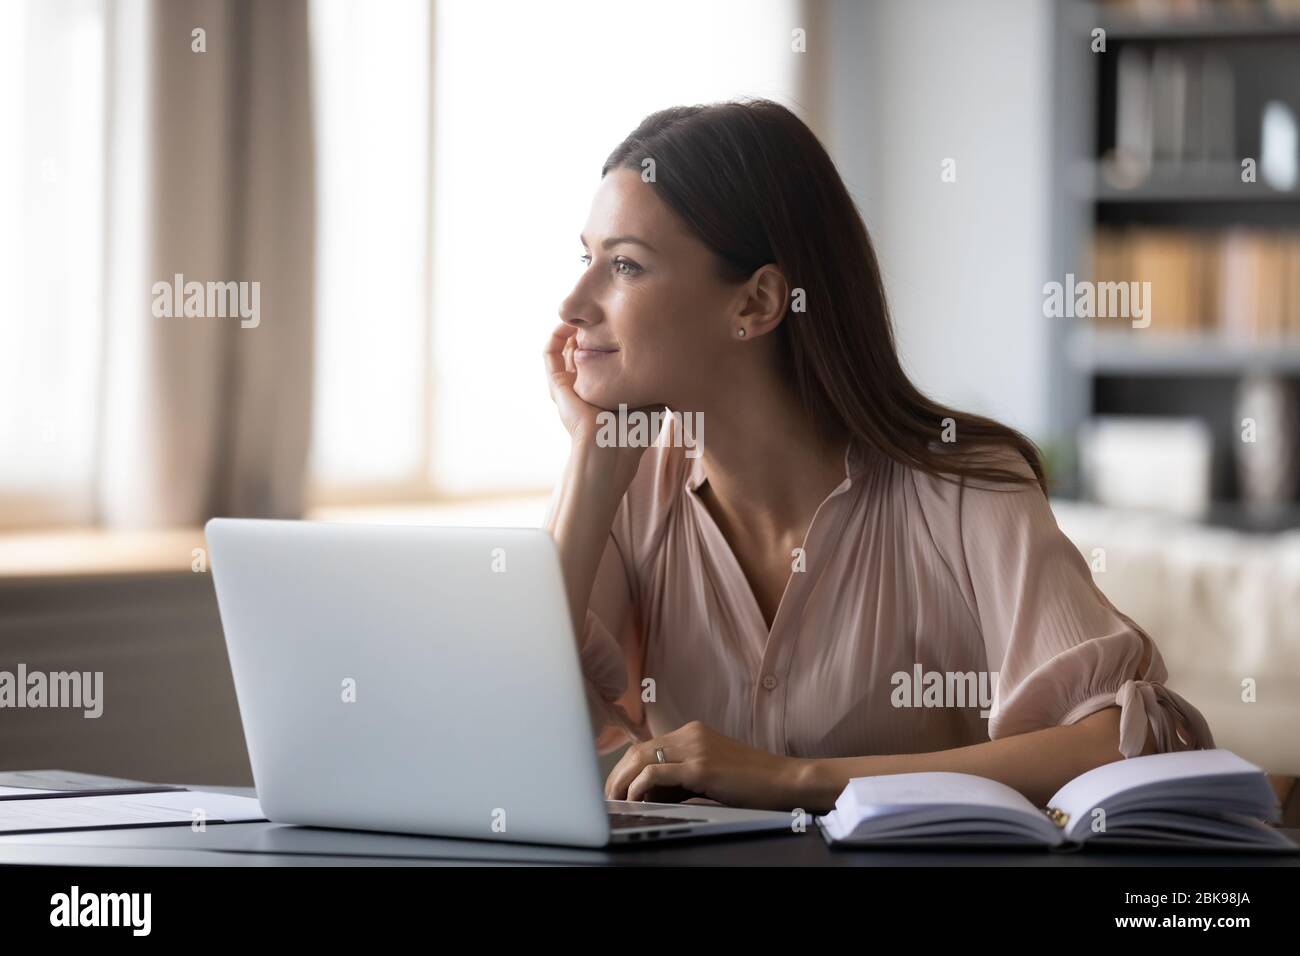 Dreamy young woman pondering ideas, sitting at desk with laptop Stock Photo